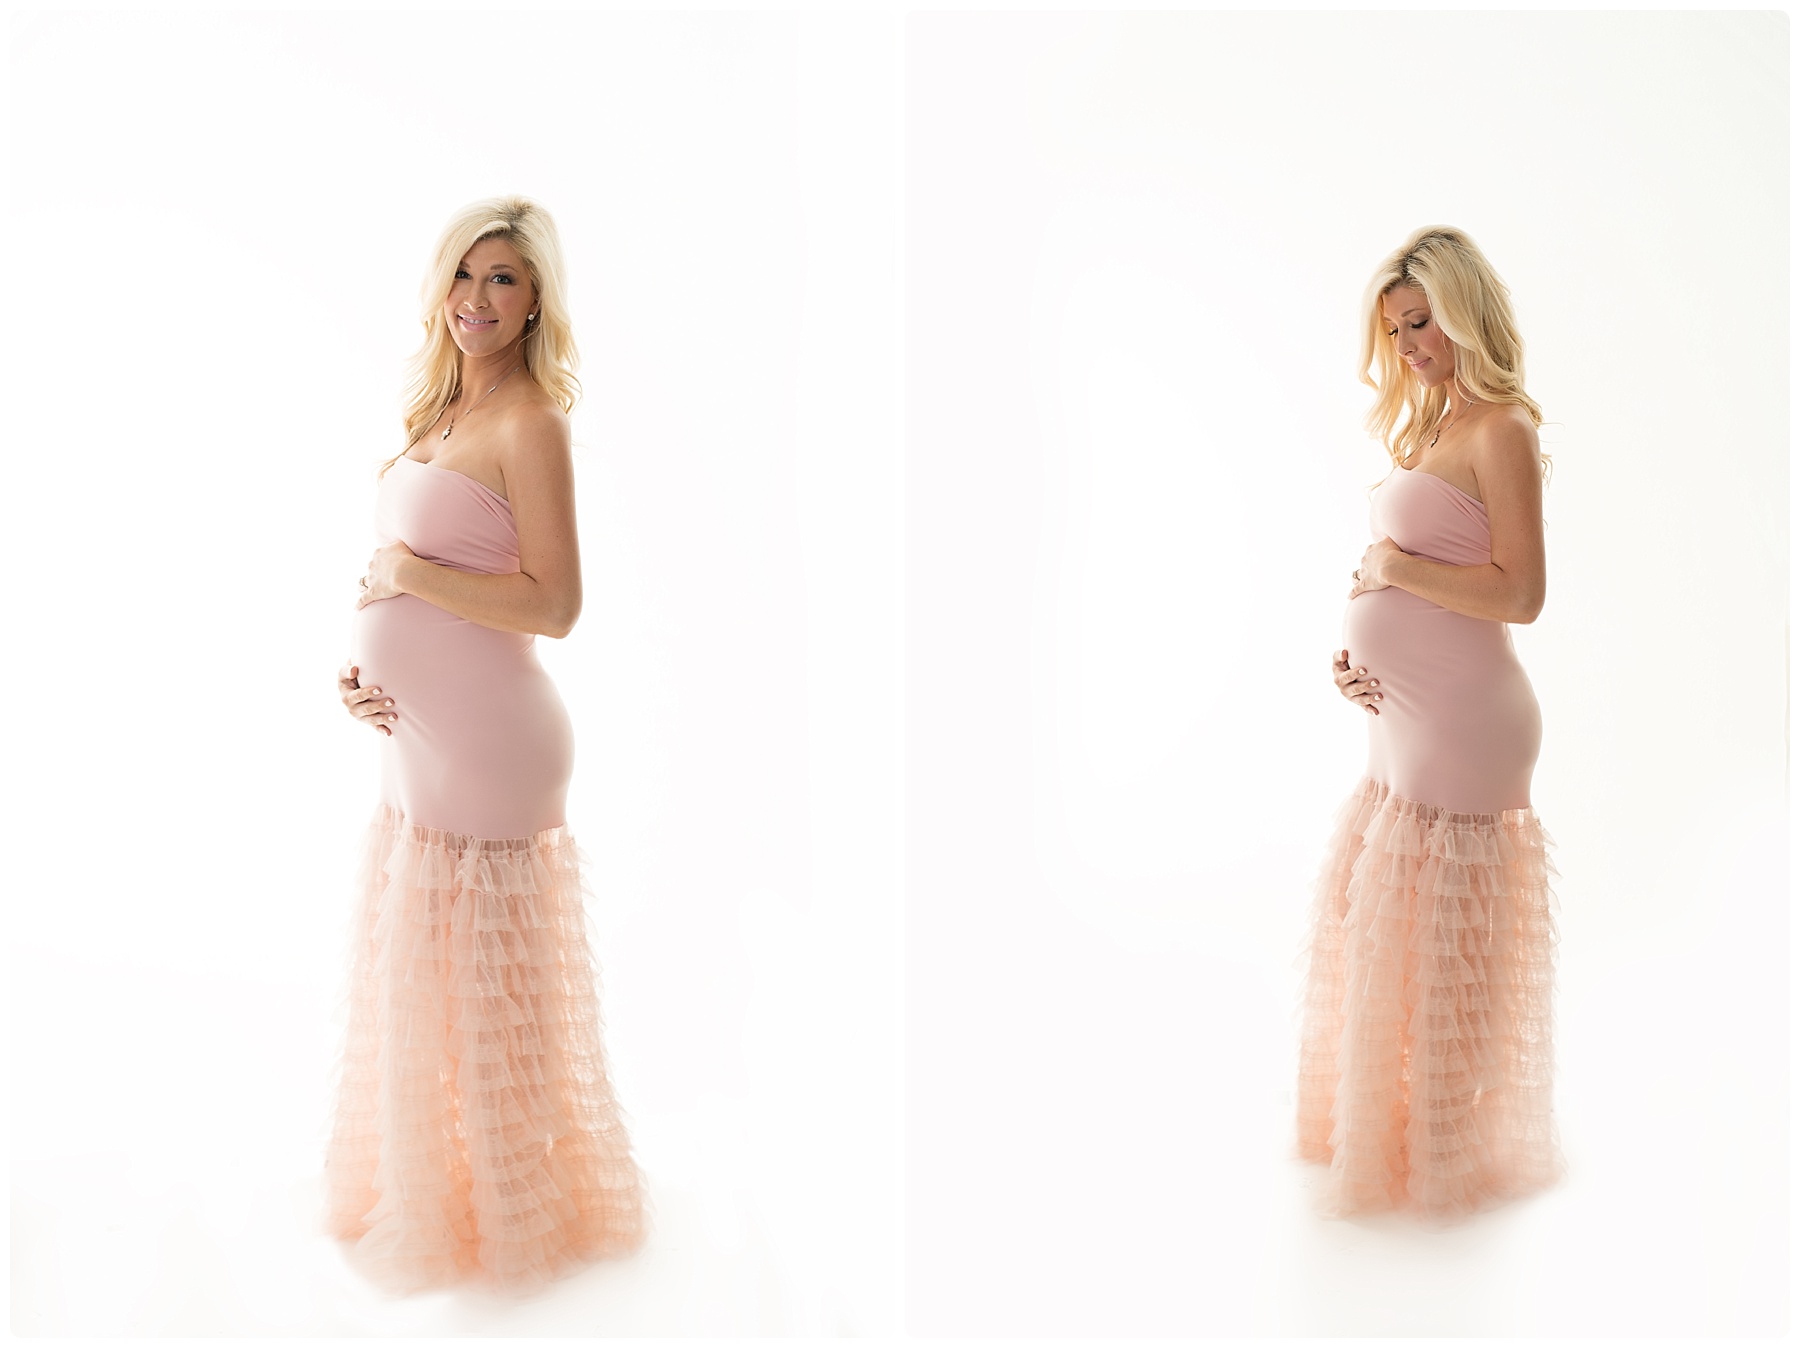 mom to be looking glamorous in pink in the studio